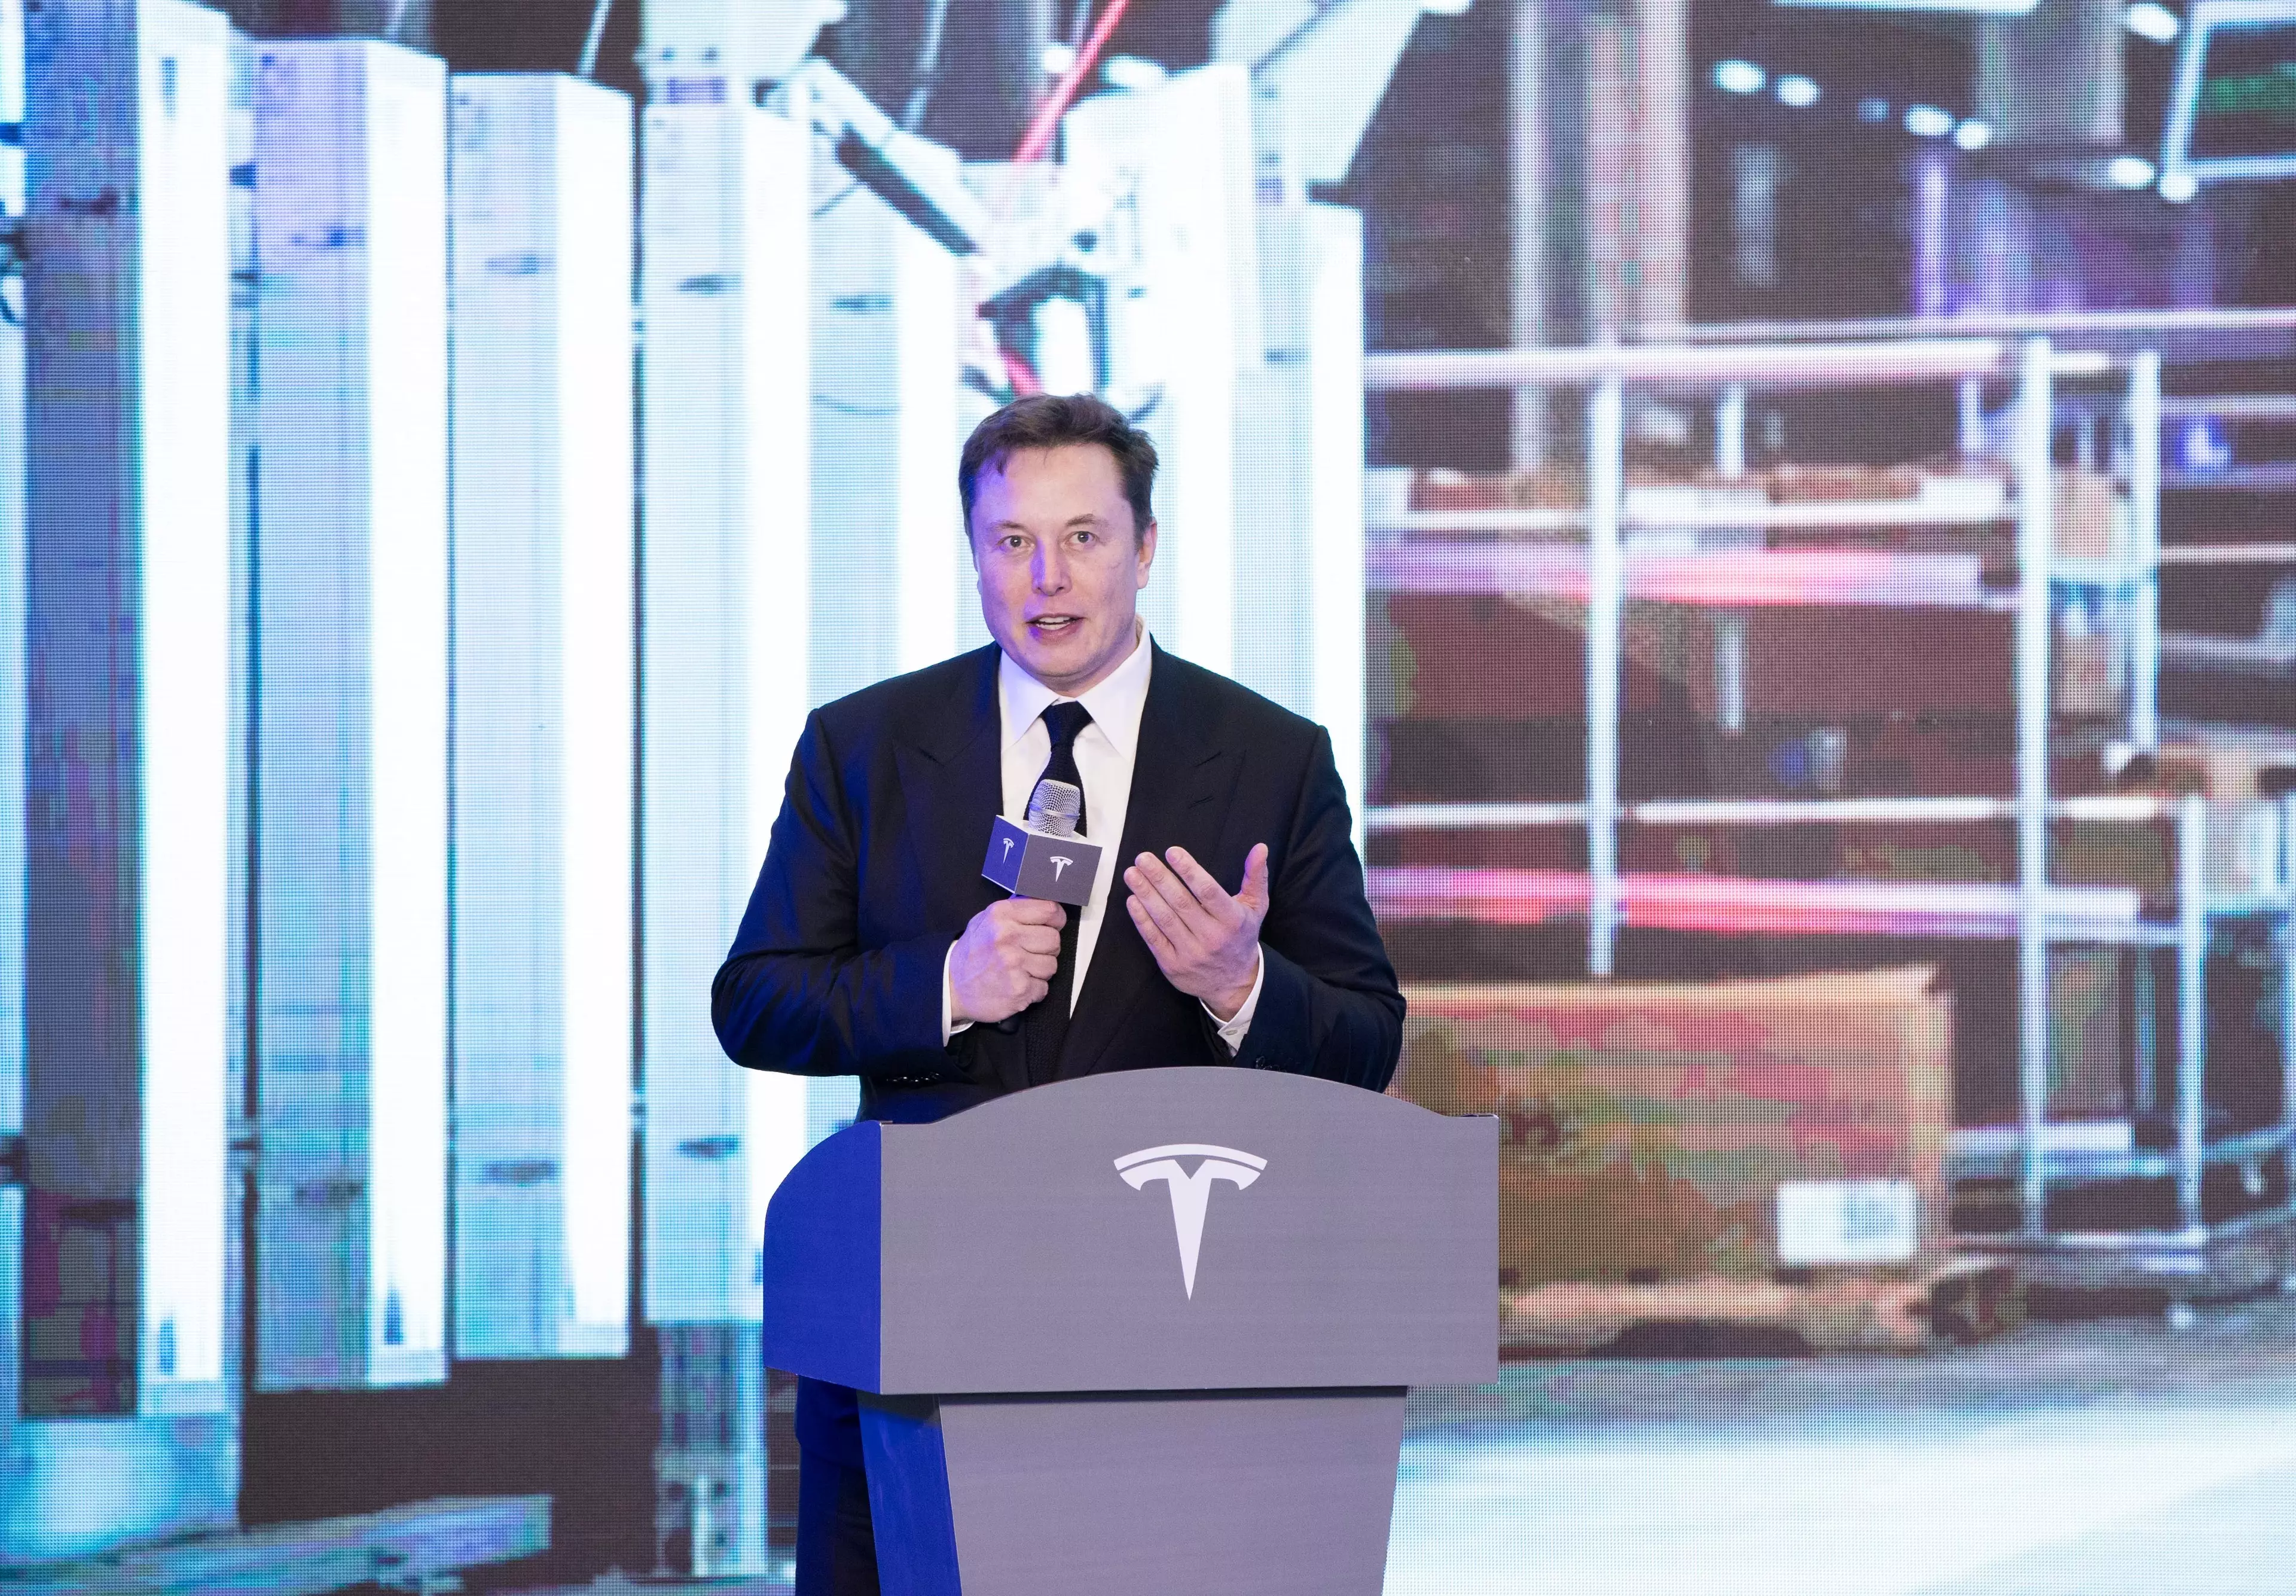 Musk's Tesla shares have risen dramatically this year.